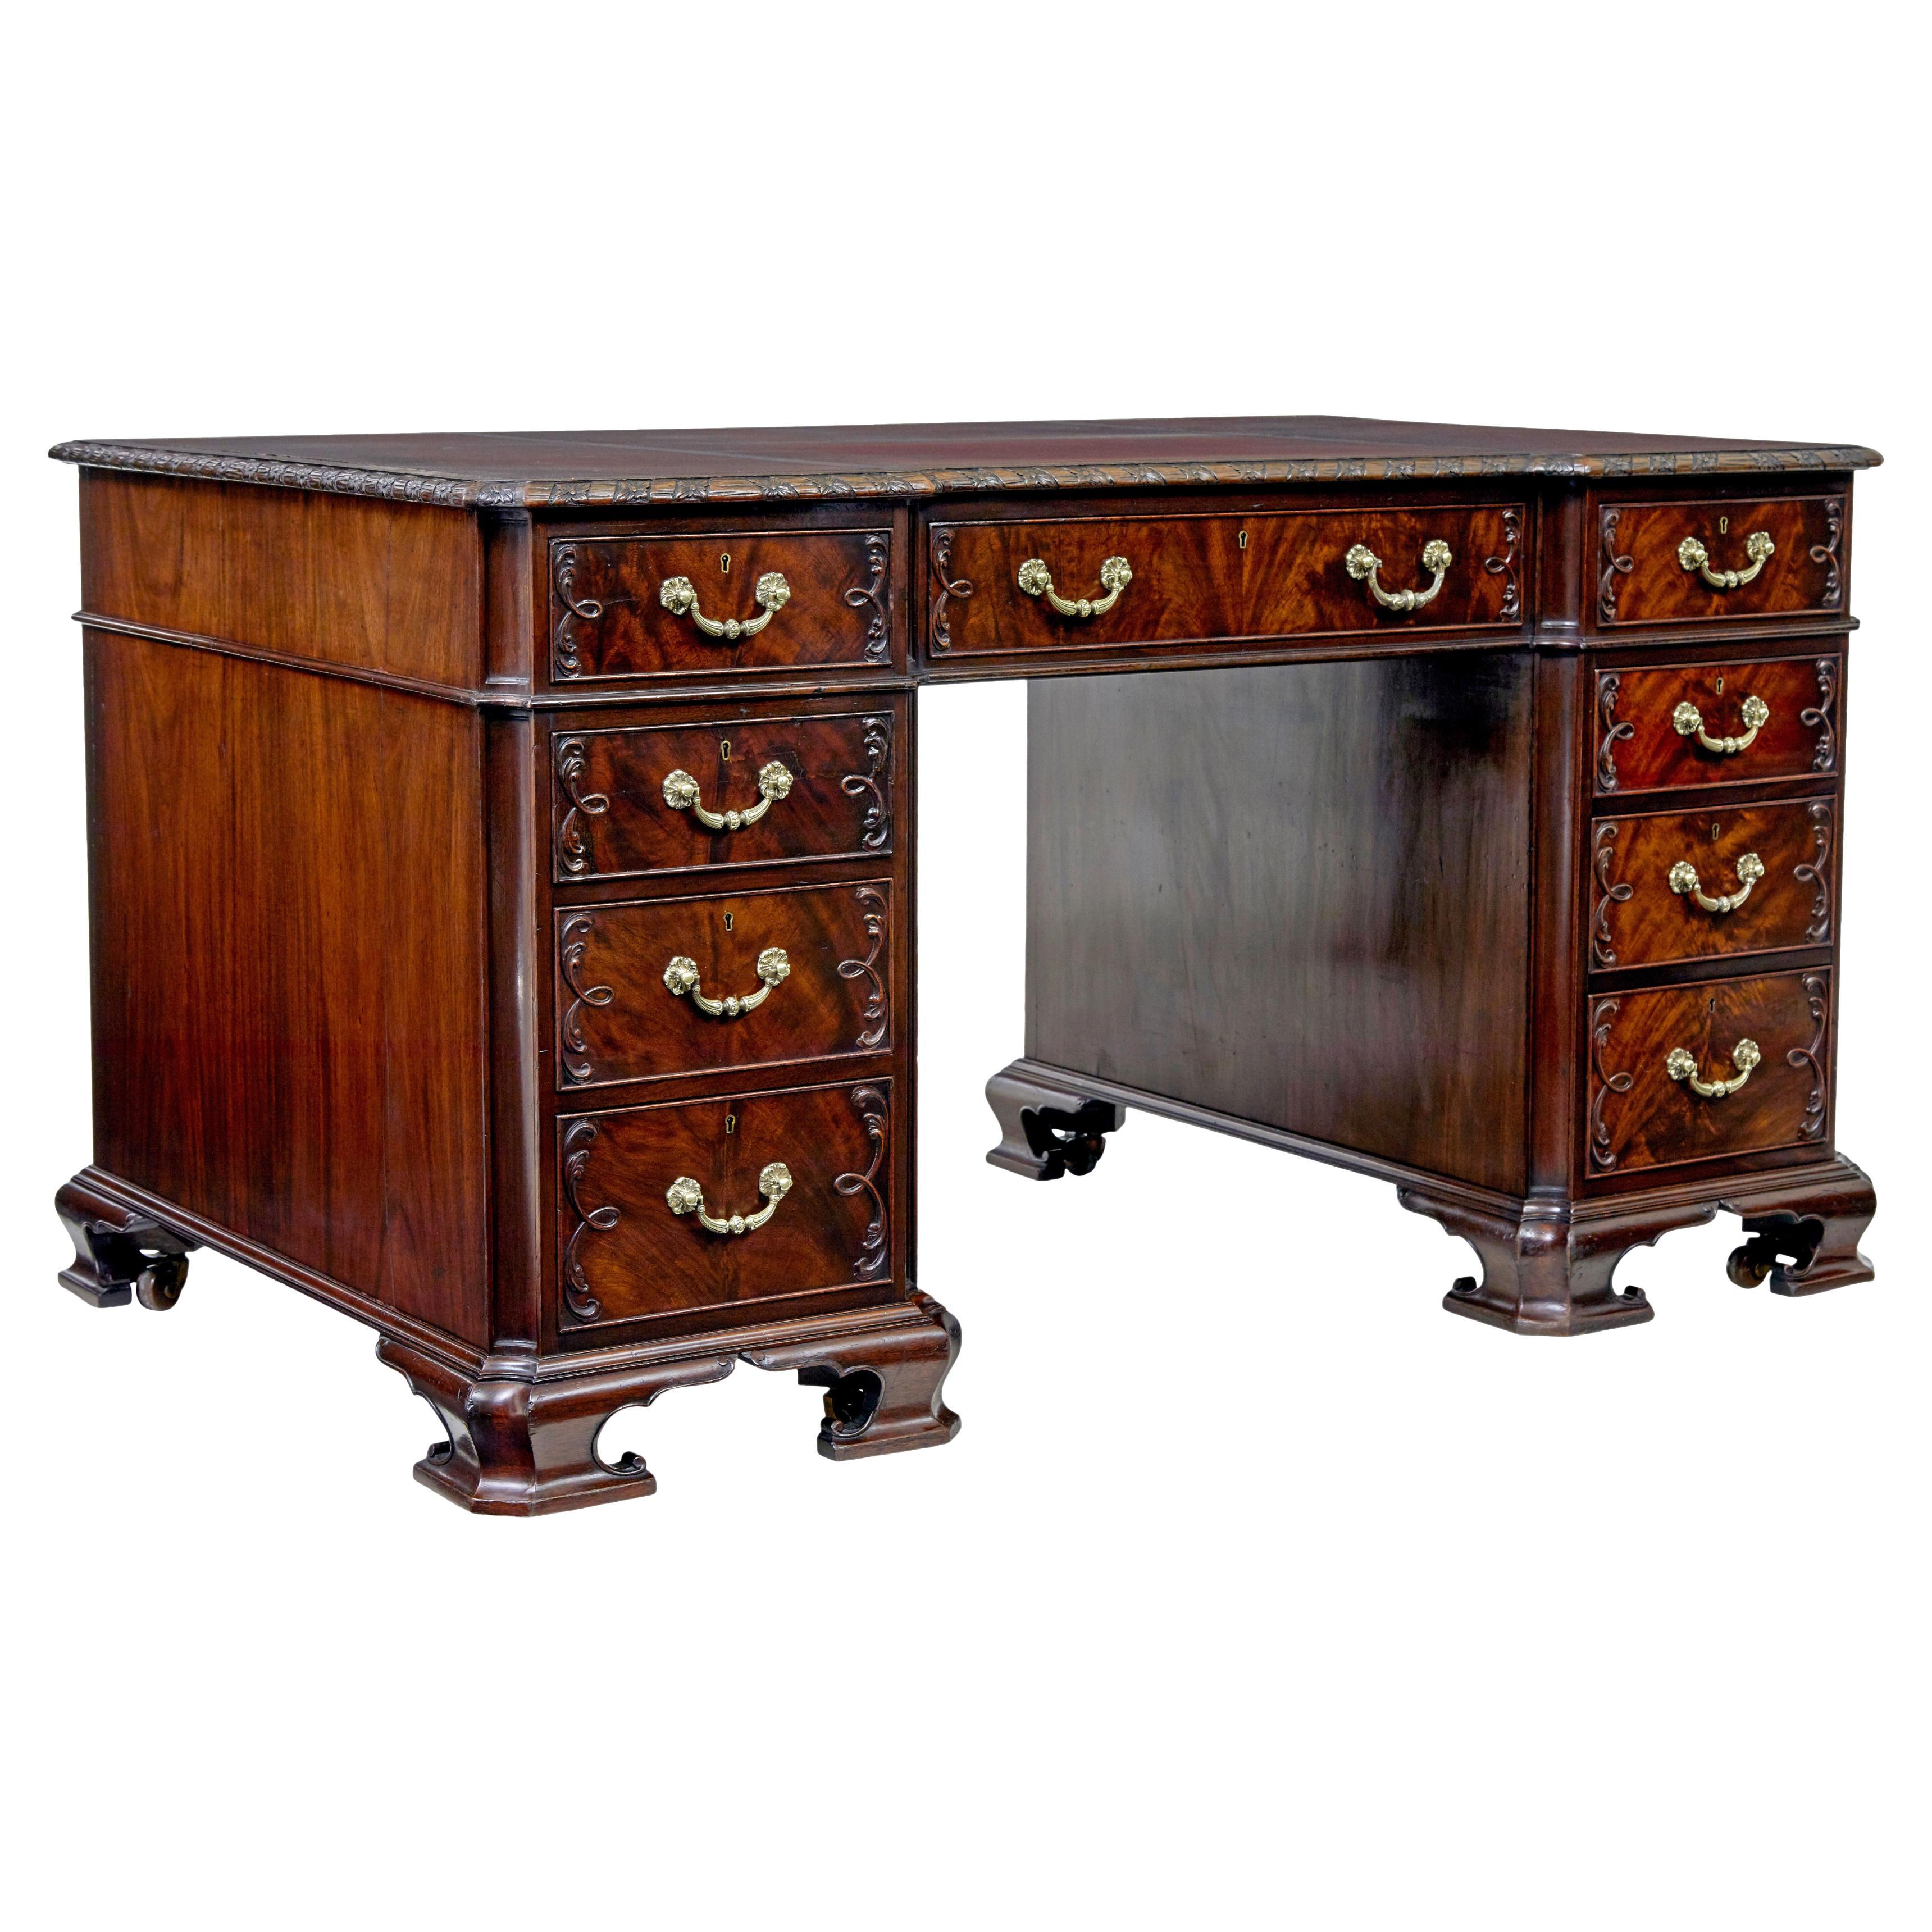 Early 20th century mahogany pedestal desk by Hobbs & Co For Sale